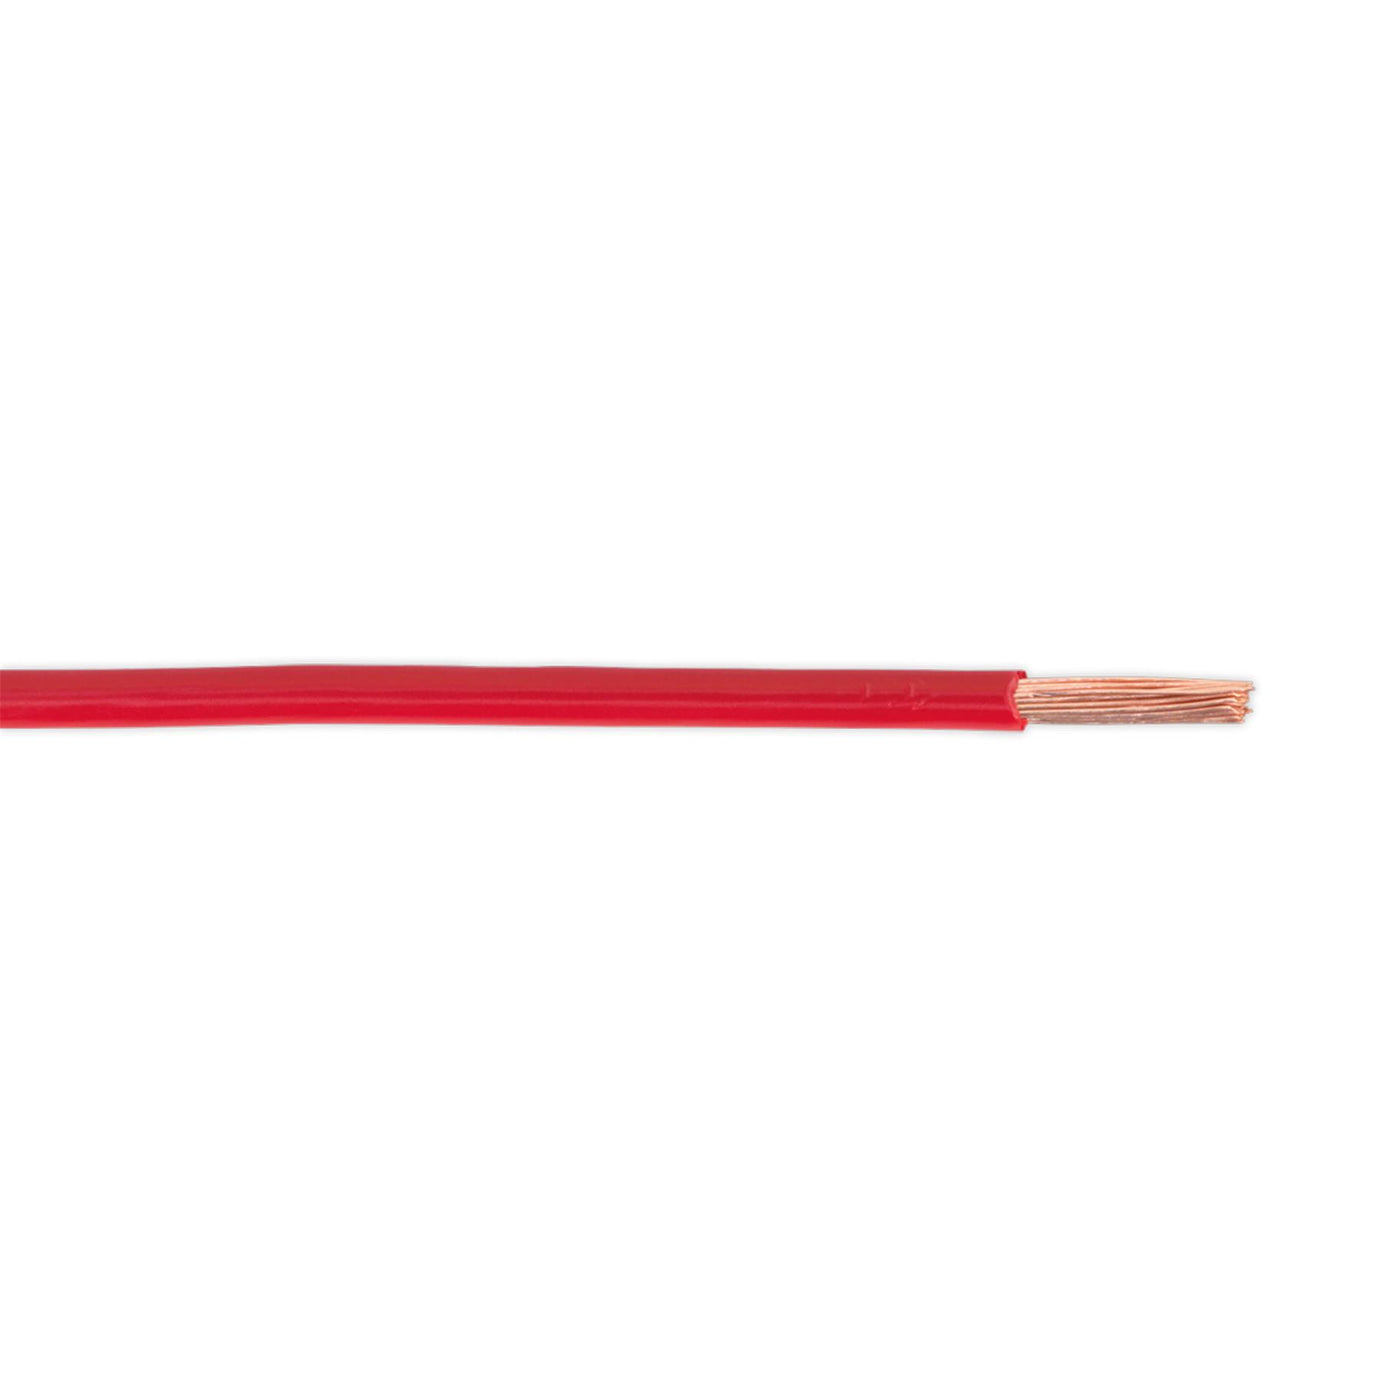 Sealey 3mm² 44/0.30mm 30m Automotive Electrical Car Van Cable Red